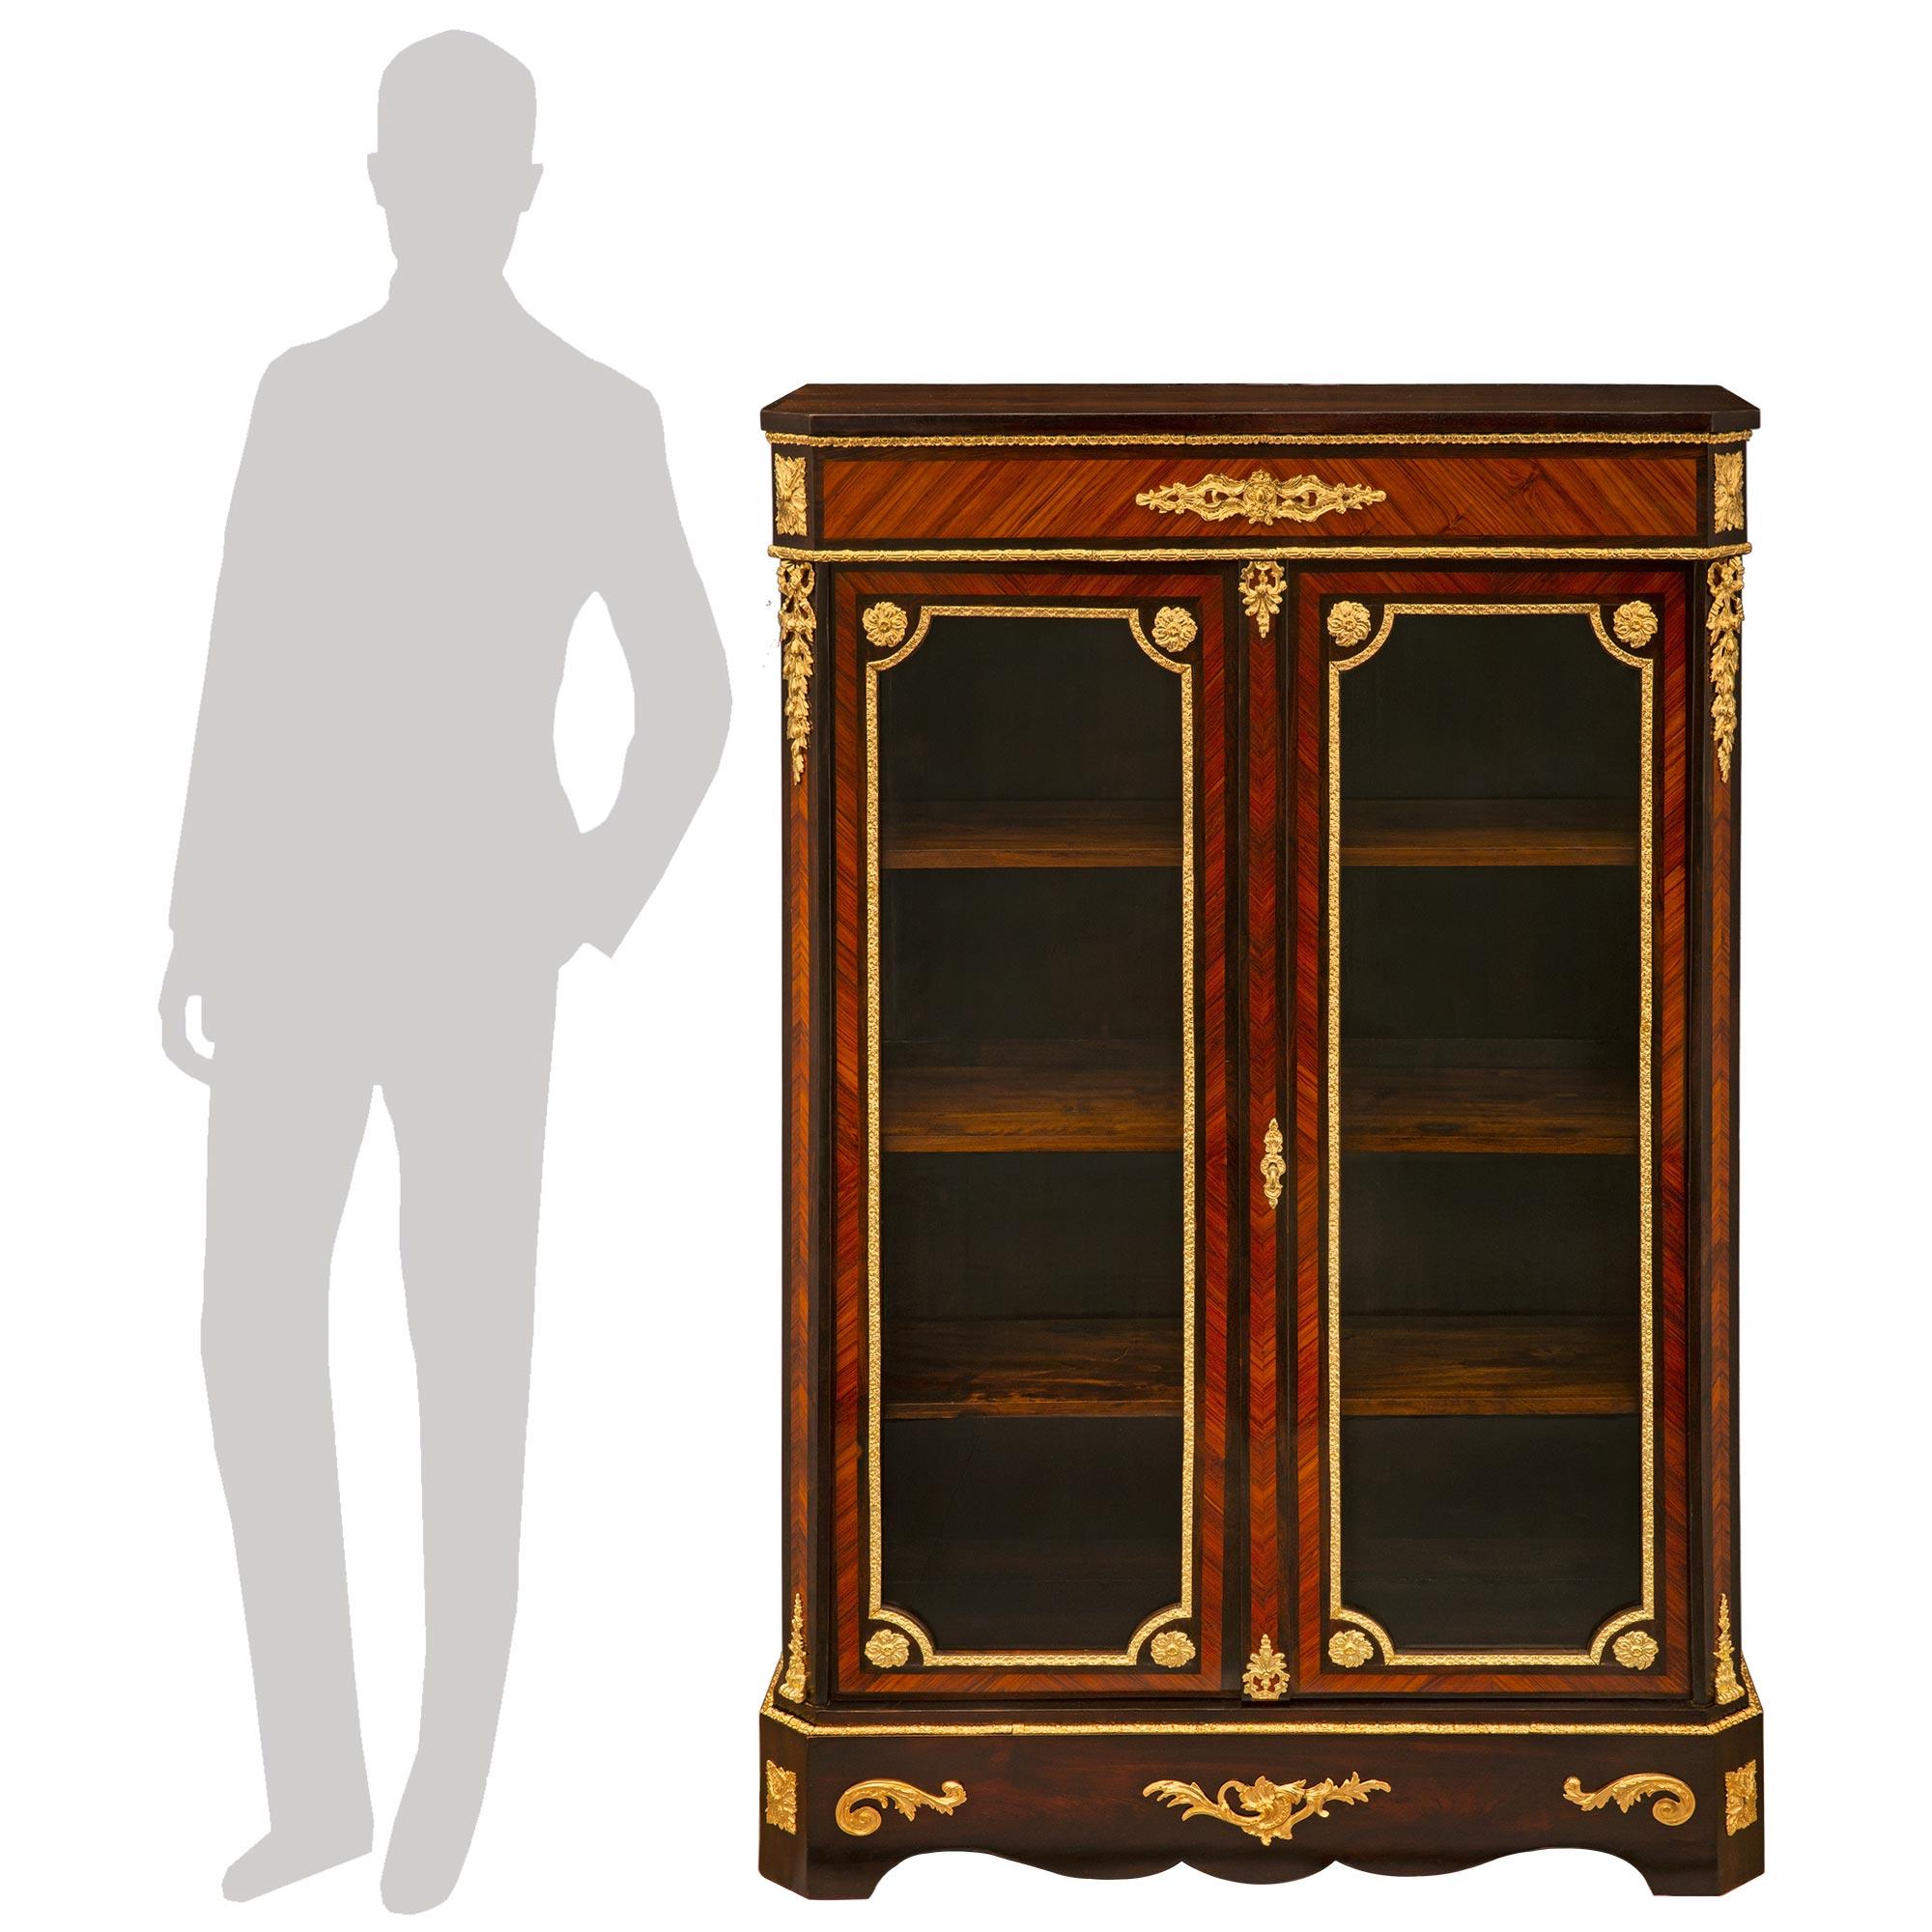 A striking and most elegantly pair of French 19th century Louis XVI st. Kingwood, Tulipwood and ormolu cabinet vitrines. Each two door vitrine is raised by fine block feet with delicate rosettes at each cut corner flanking the scalloped frieze